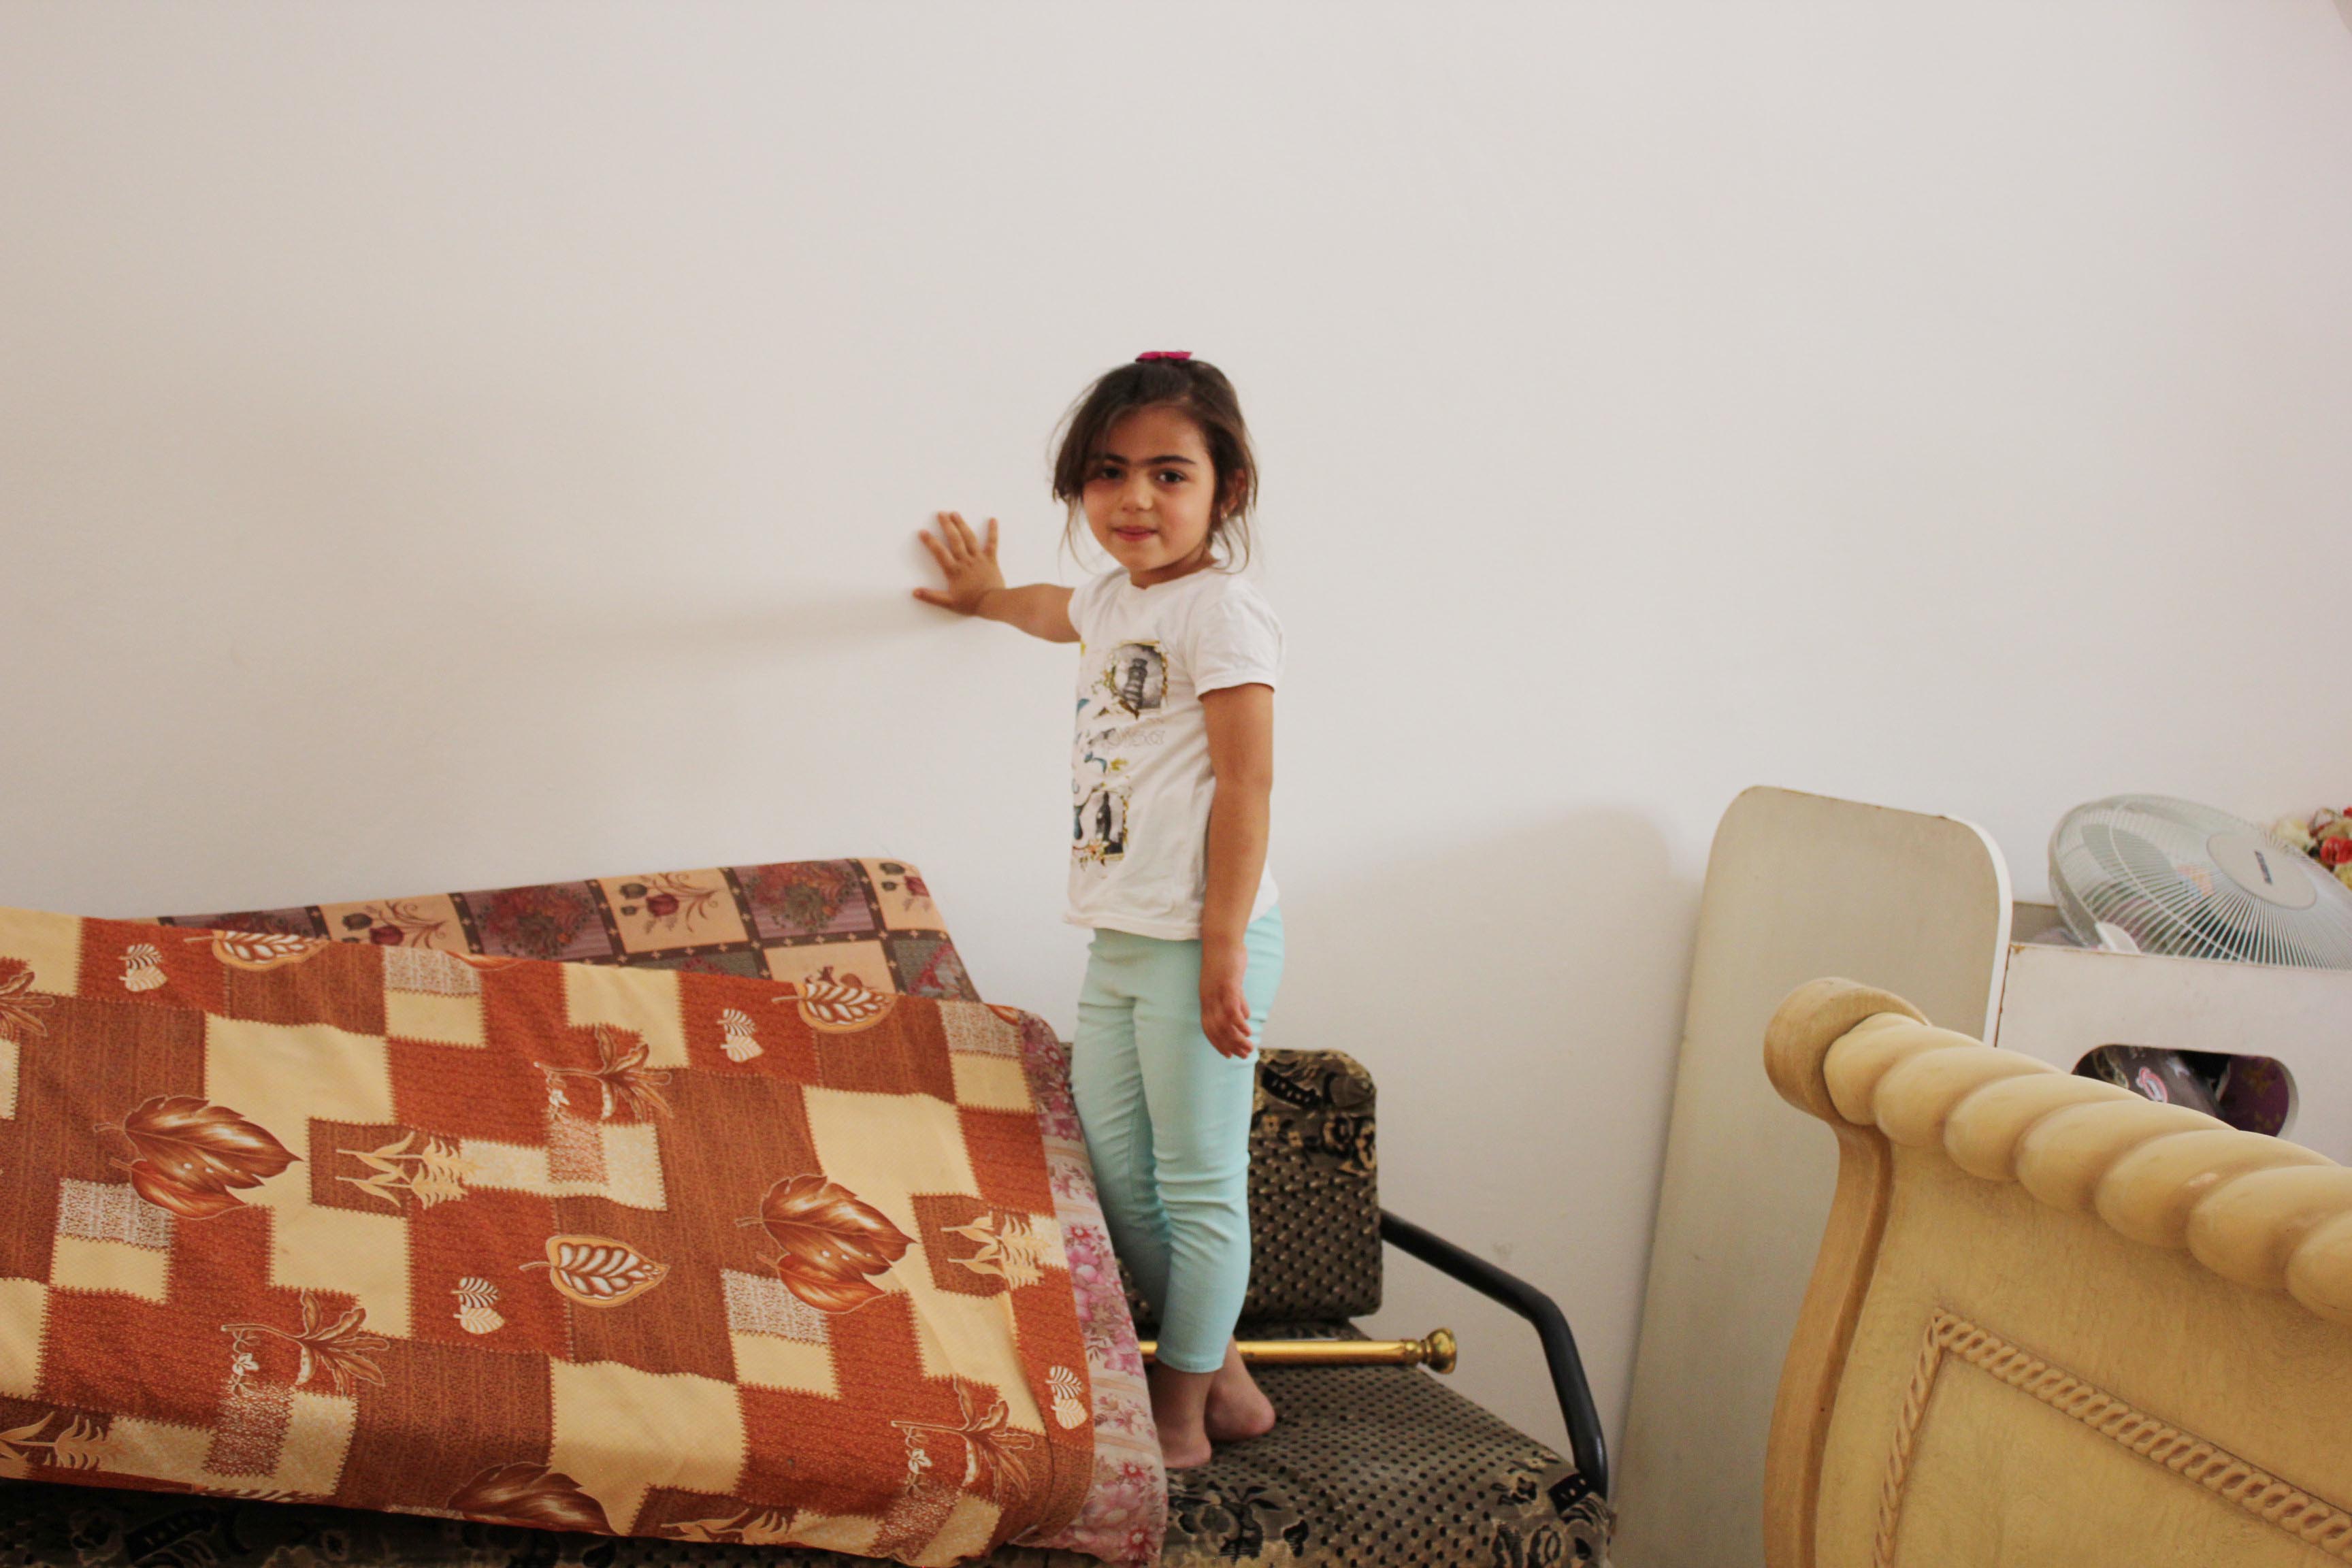 Suhad’s daughter, Muluk (4 years old), standing in her repaired bedroom.